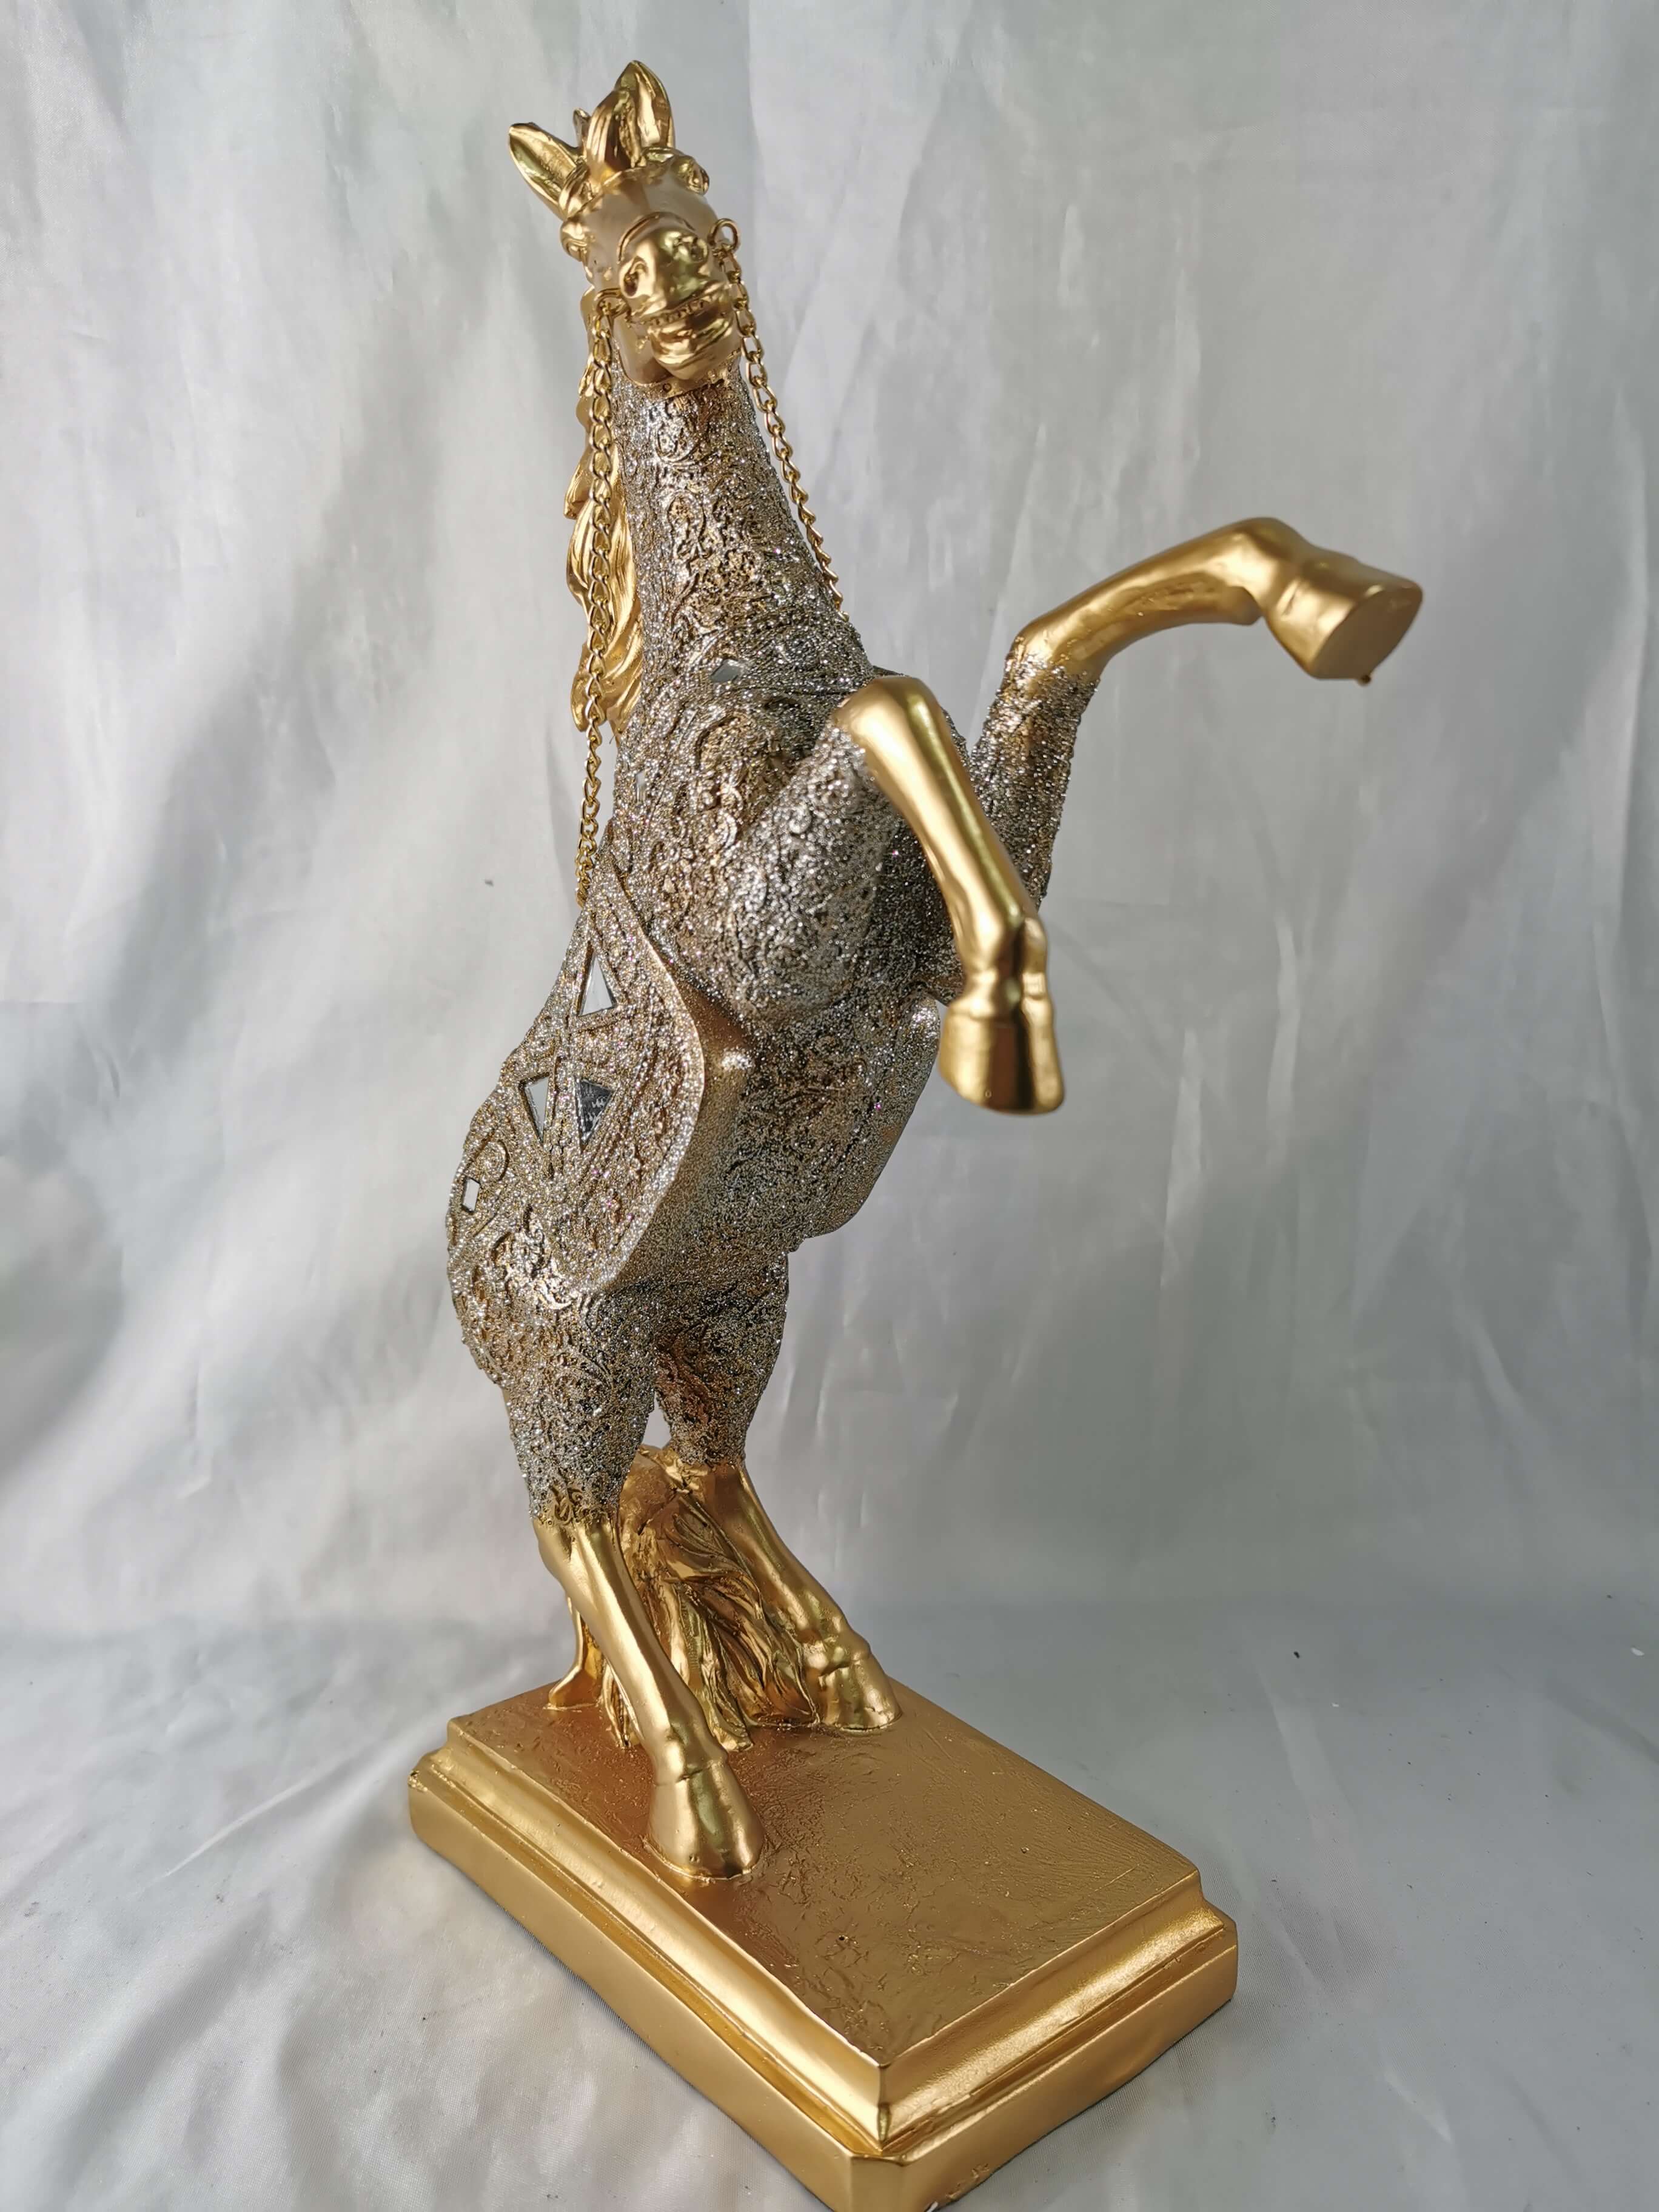 Gold Horse Display Figurine - Home Decor, Collection, Gift Ideas